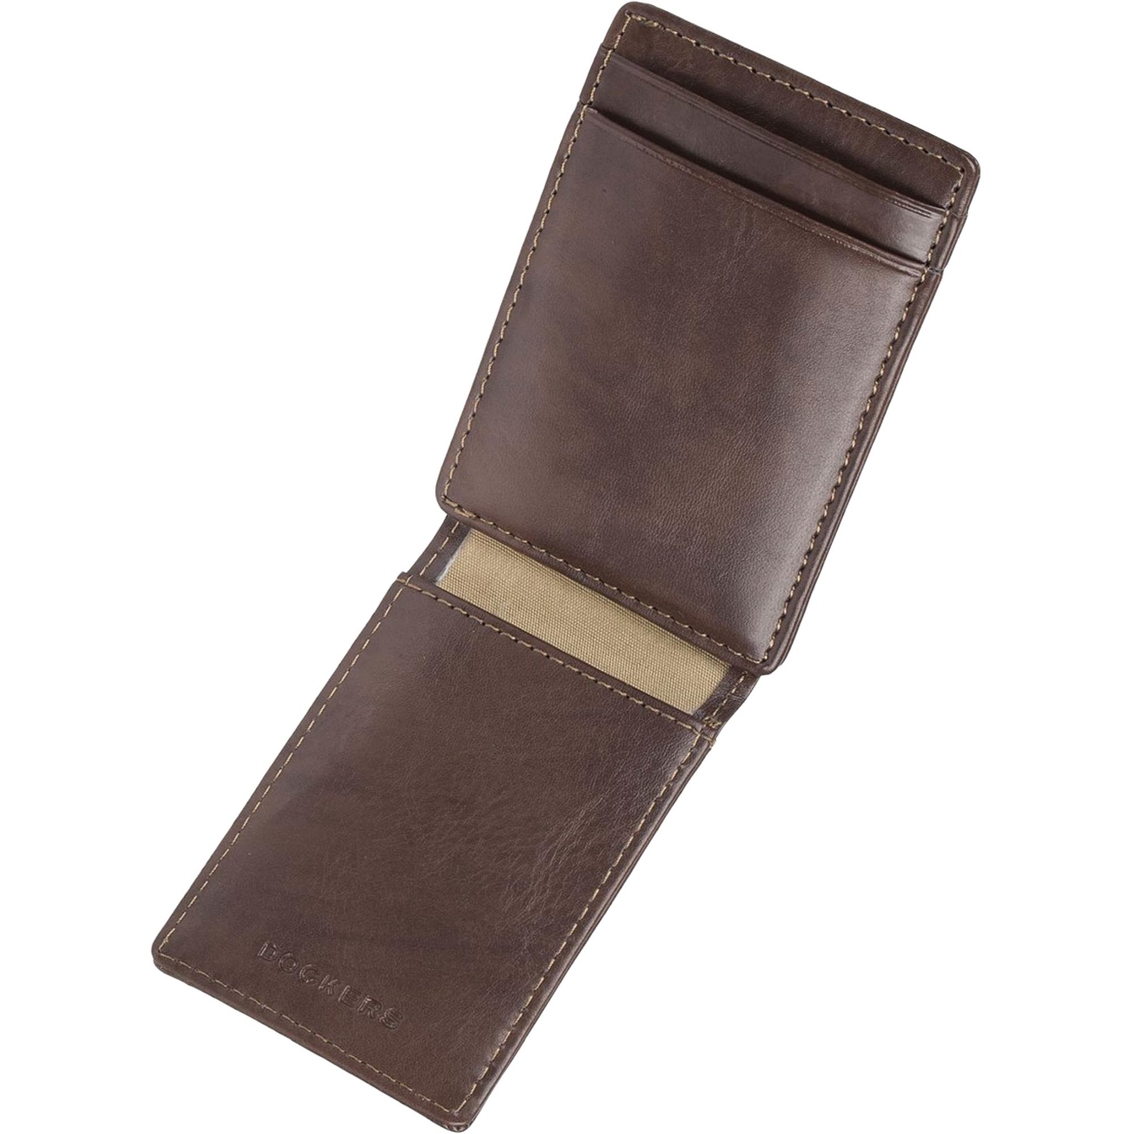 Dockers RFID Card Case Wallet with Magnetic Front Pocket - Image 3 of 3